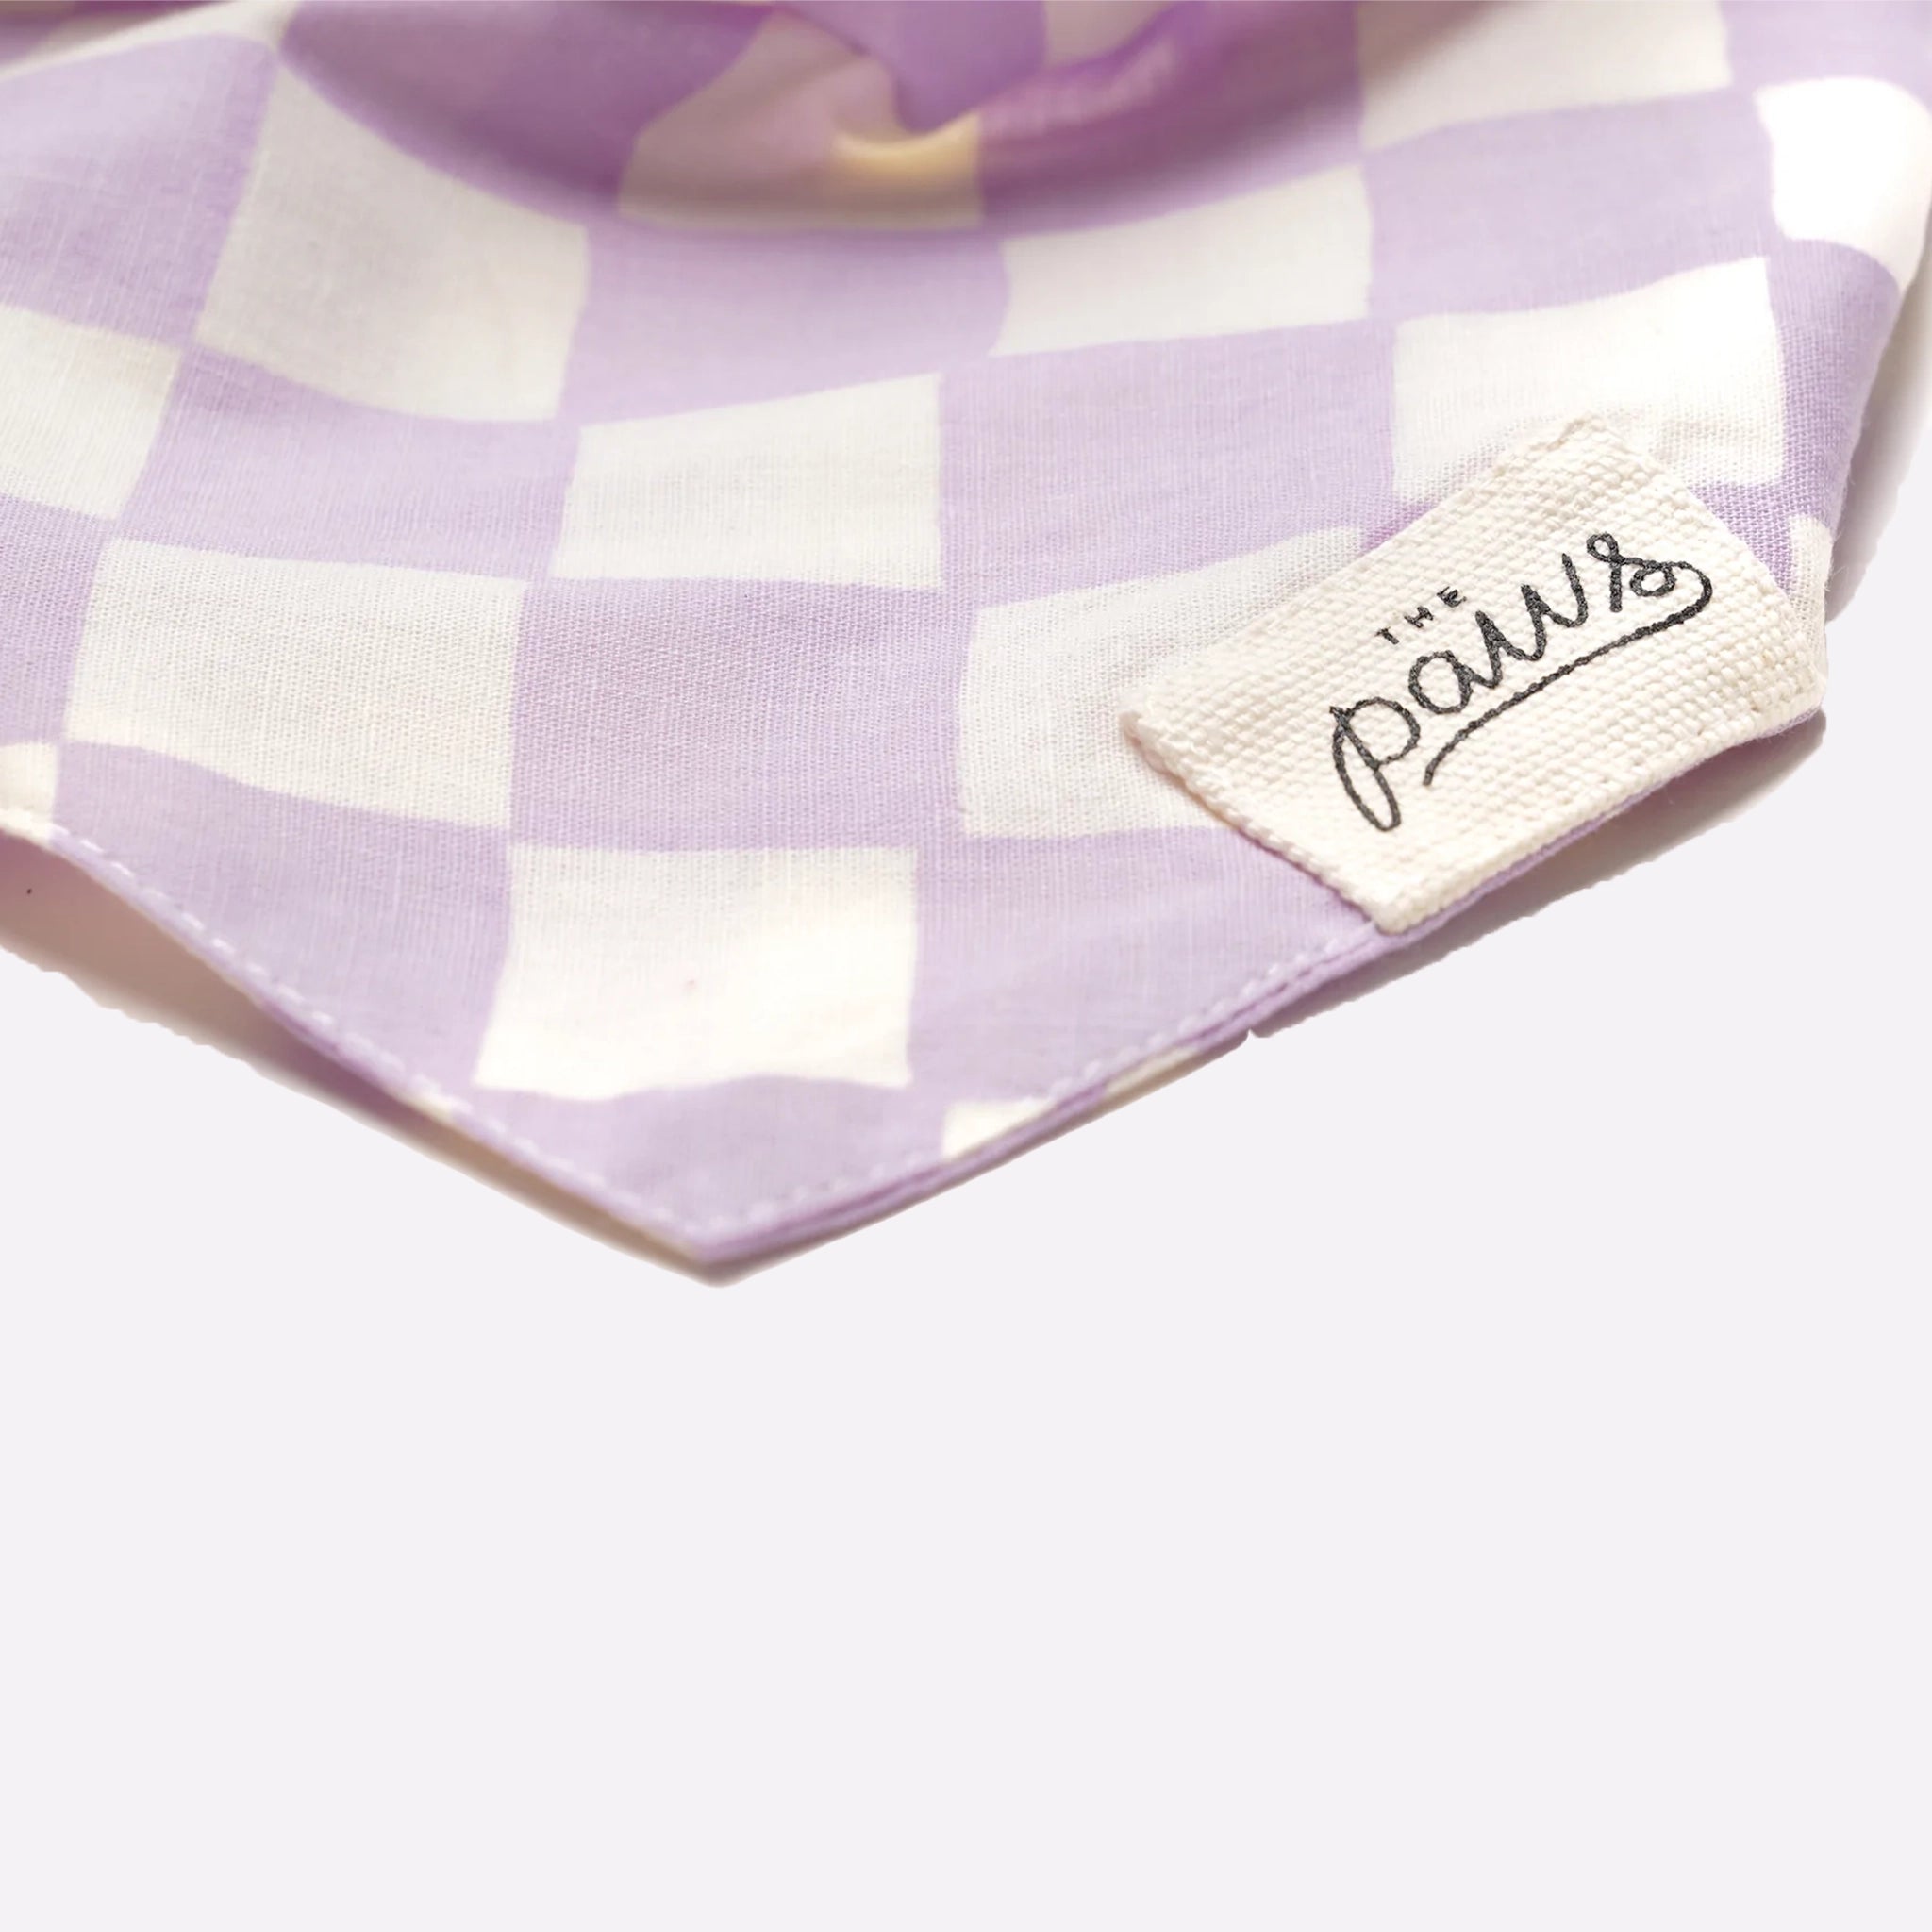 A lavender and white checkered pet bandana with a tie back and a small label on the front that reads the brand's name, "The Paws".